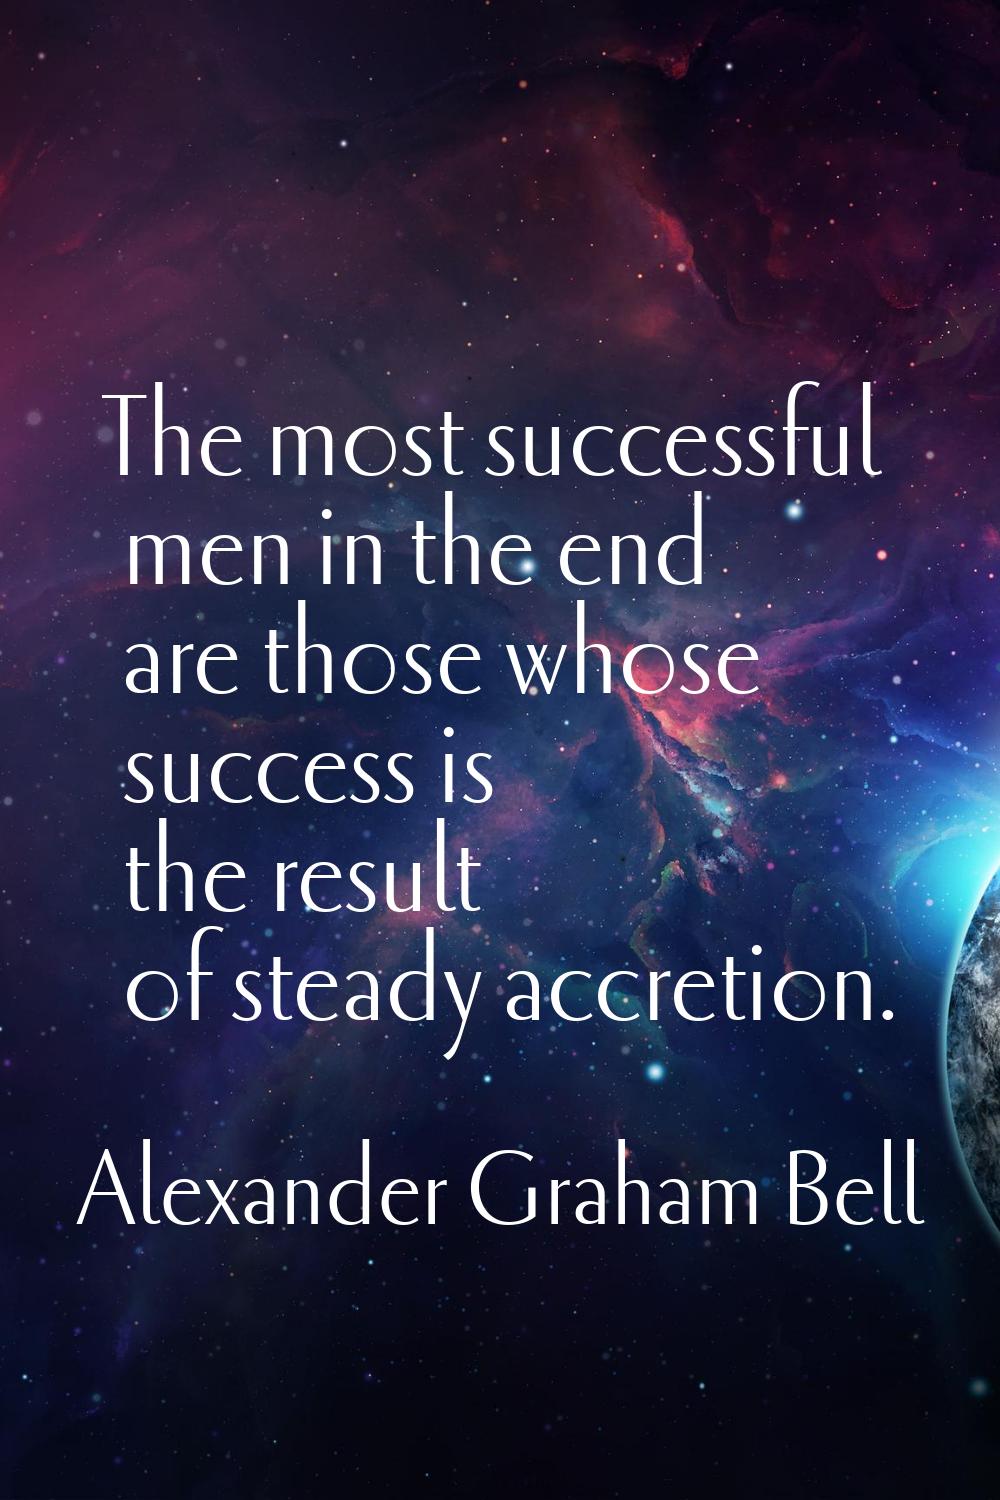 The most successful men in the end are those whose success is the result of steady accretion.